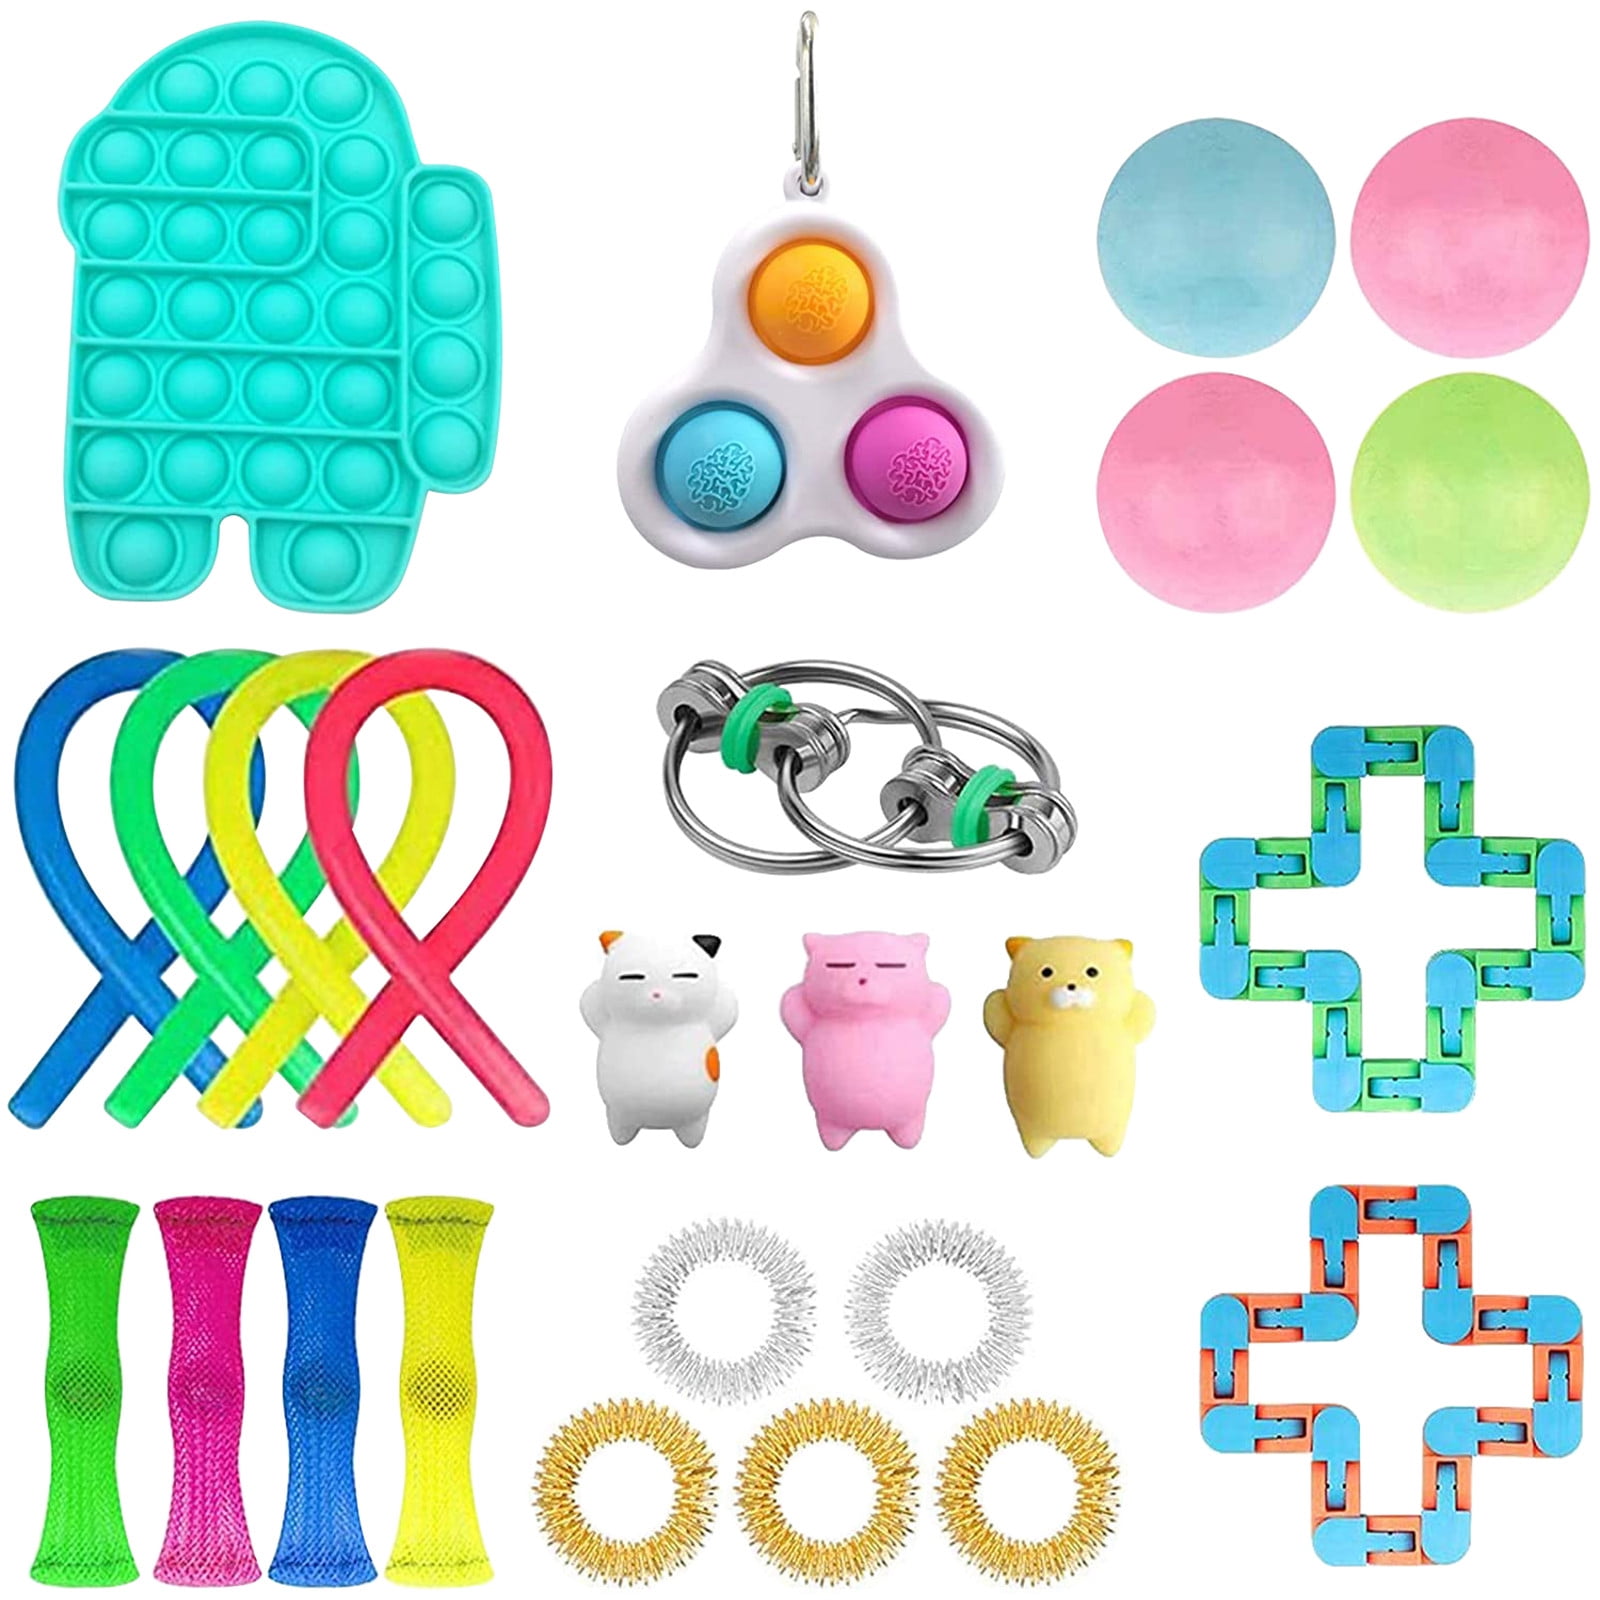 School Classroom Rewards Treasure Box Prizes Special Toys Assortment for Birthday Party Favors 23 Pack Sensory Toys Pack for Stress for Kids and Adults HOHOFAN Fidget Toy Set 